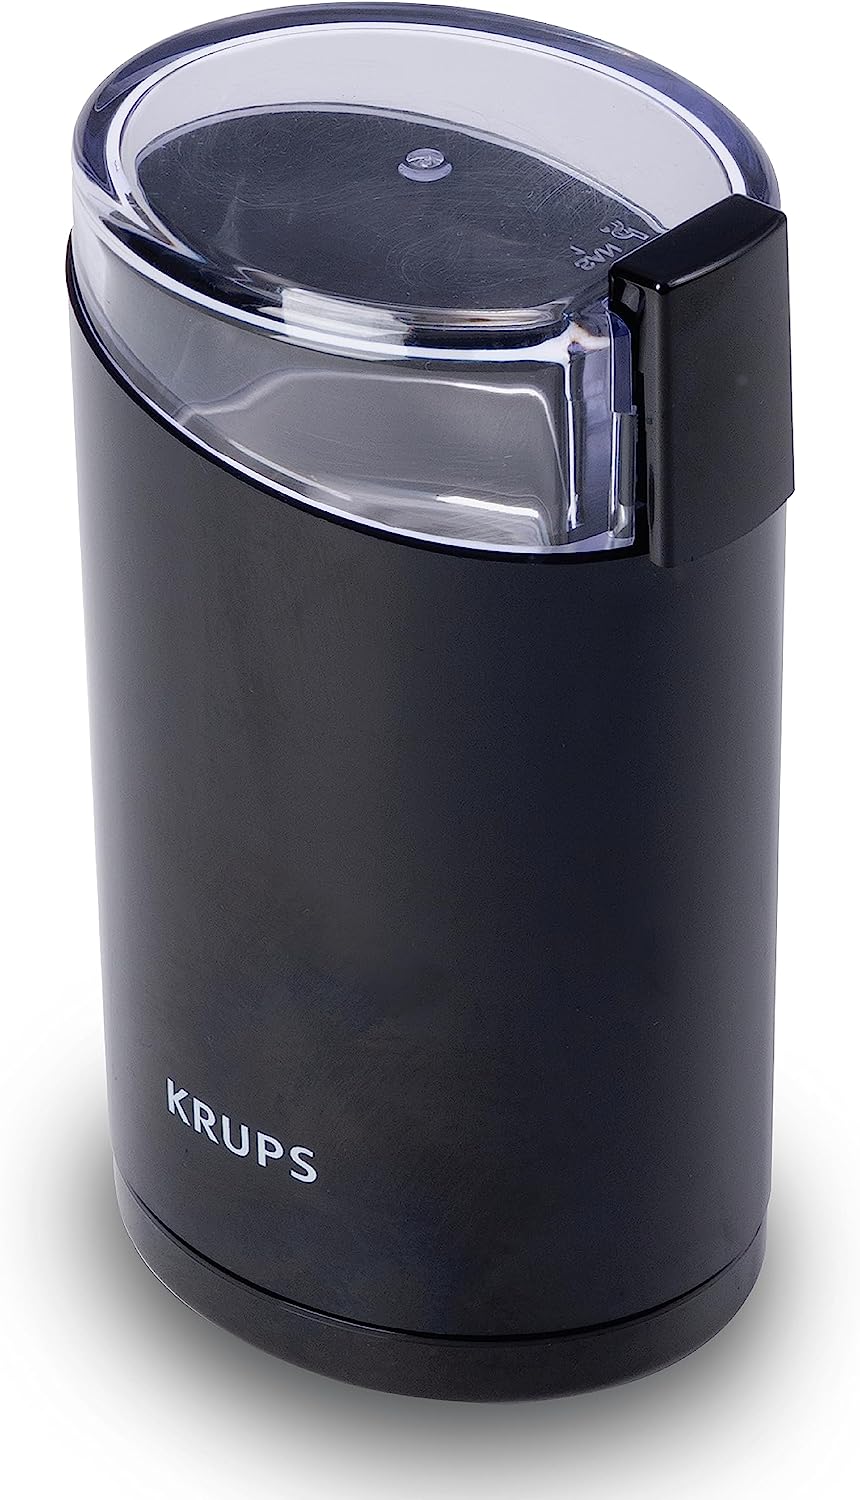 Krups One-Touch Coffee and Spice Grinder Grinder Review